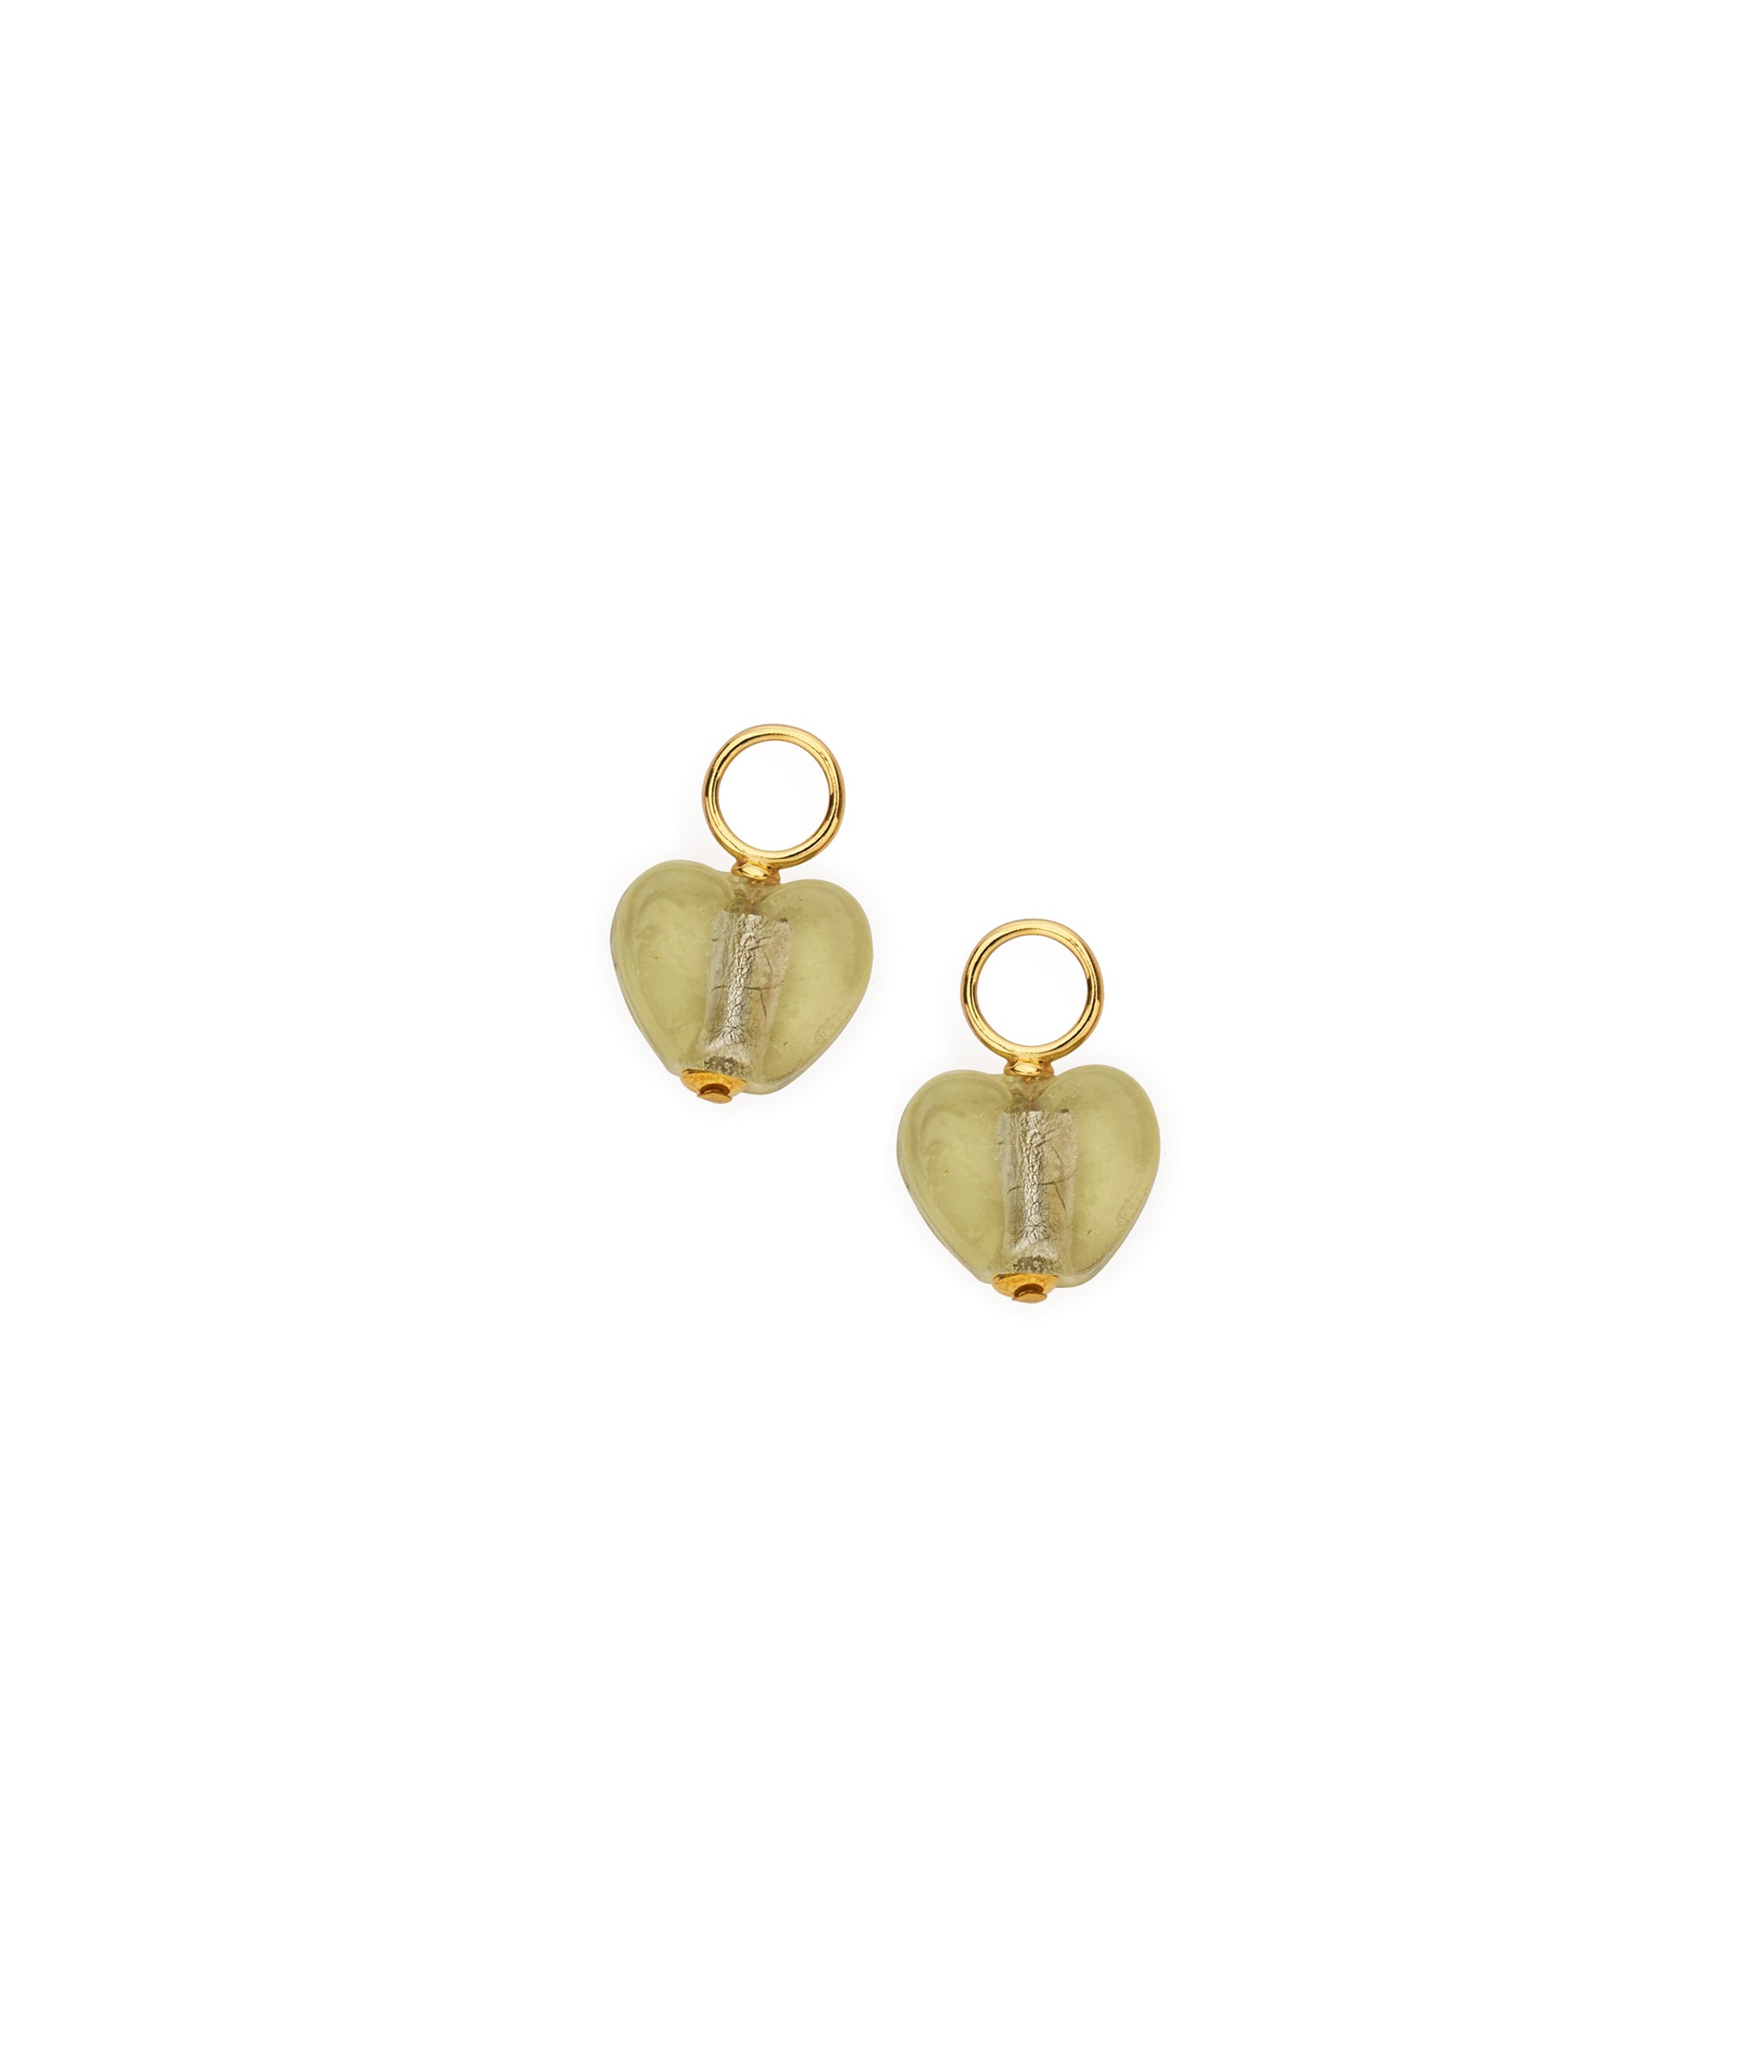 August Aura Charm. Pair of peridot heart charms with gold-plated brass ring.